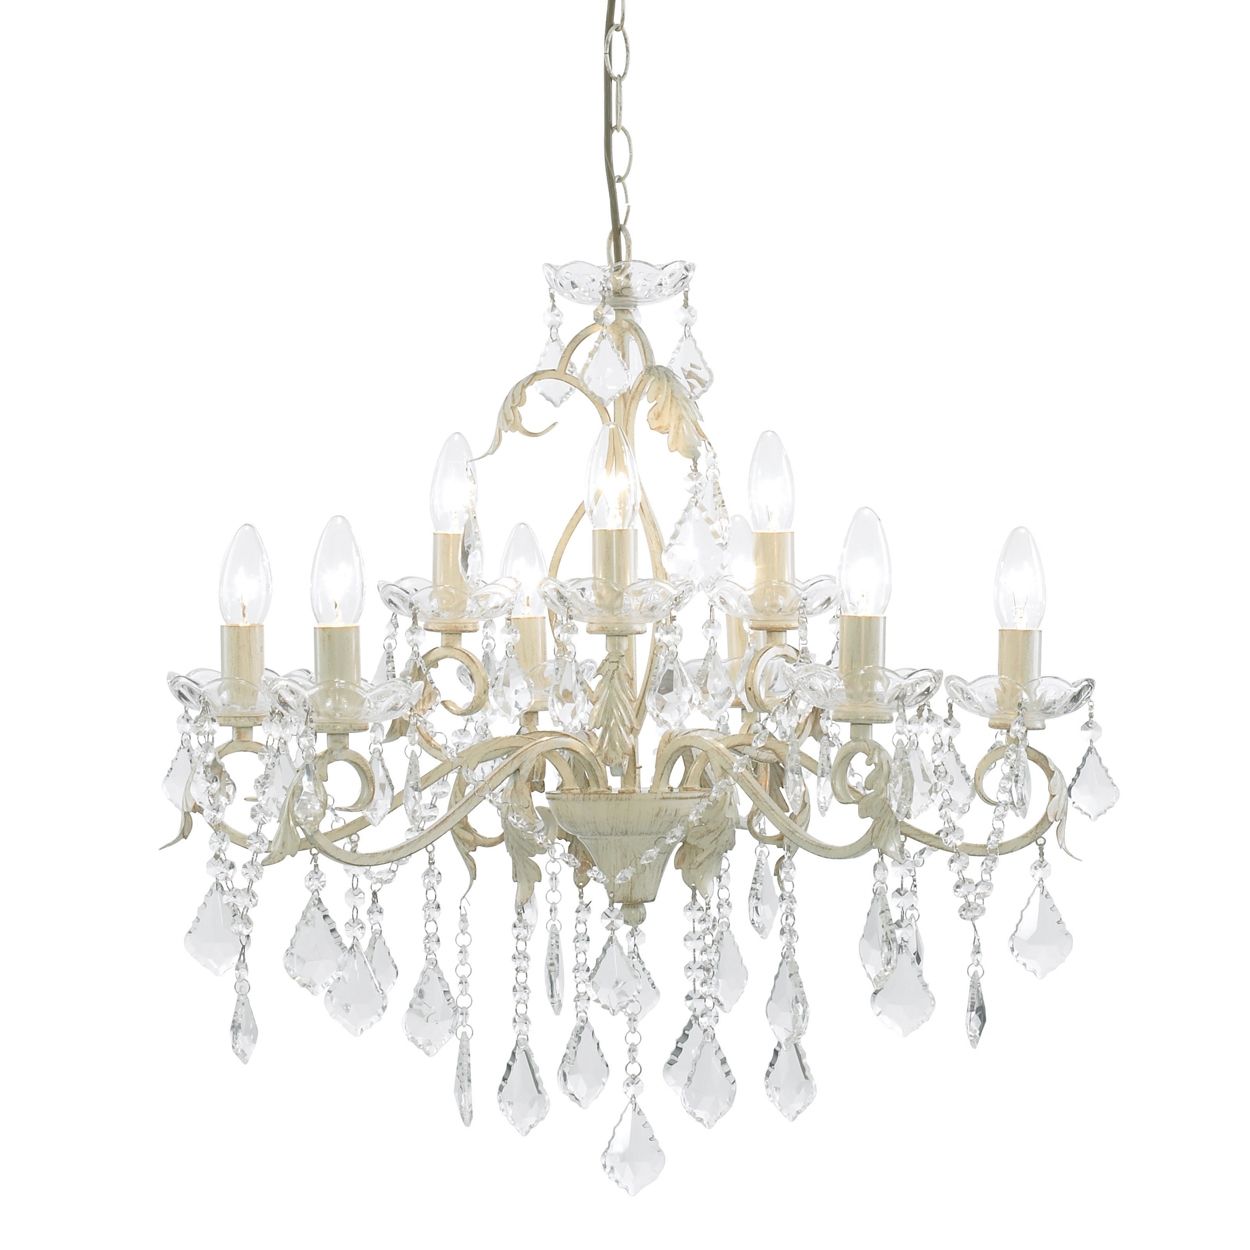 Awesome Crystal Chandelier Design Ideas And Decor Intended For Cream Gold Chandelier (Photo 2 of 12)